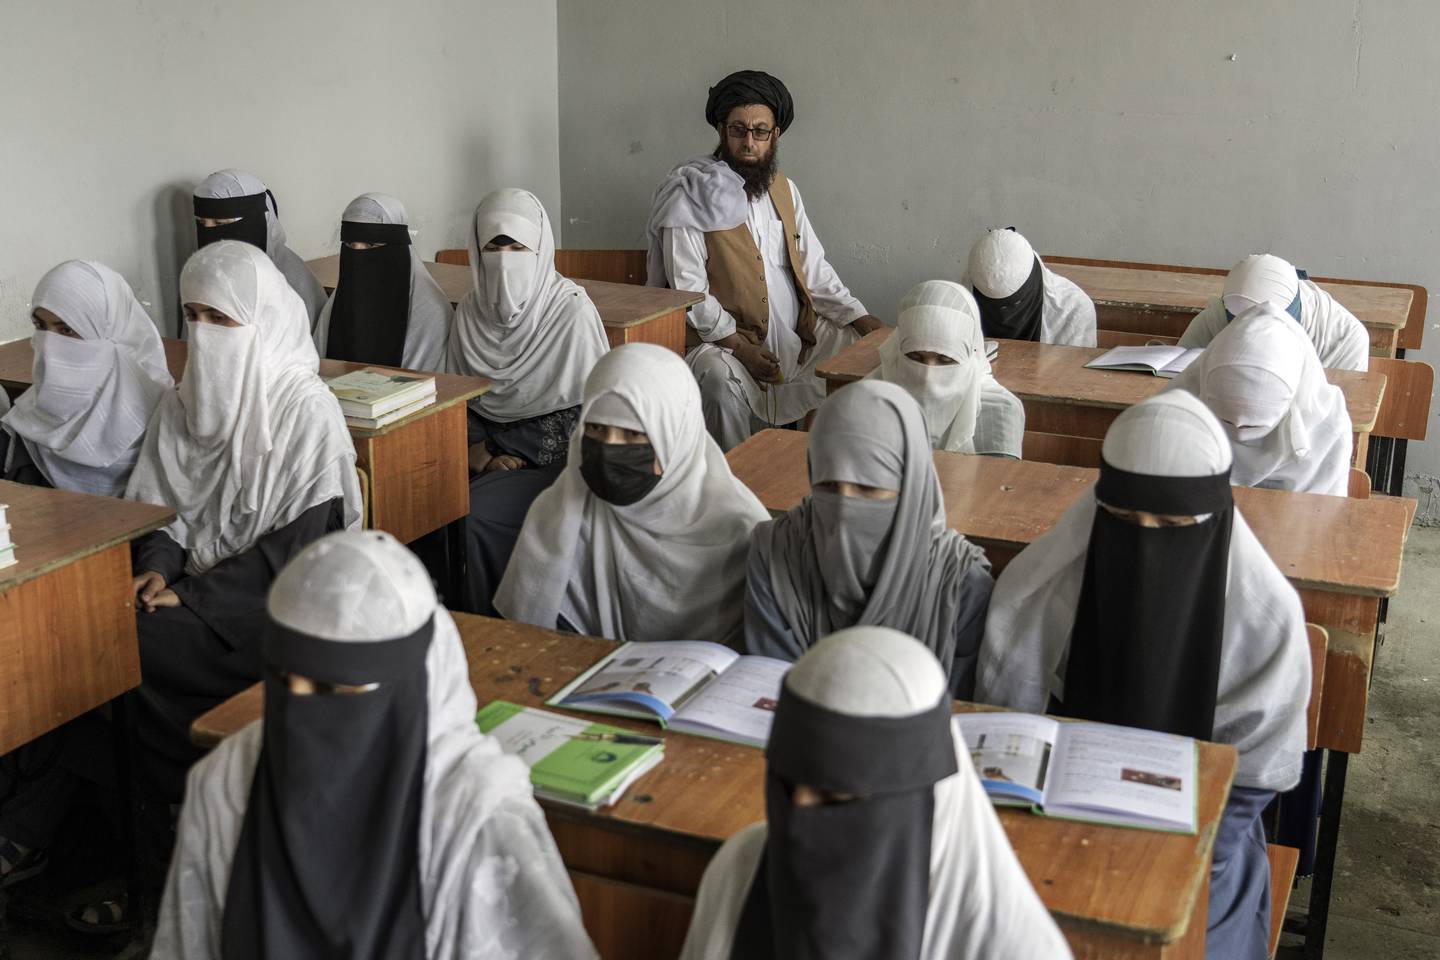 Afghan girls attend a religious school, in Kabul, Afghanistan, in August. Afghan girls have been told they can take high school graduation exams in December even though they have been banned from classrooms. AP